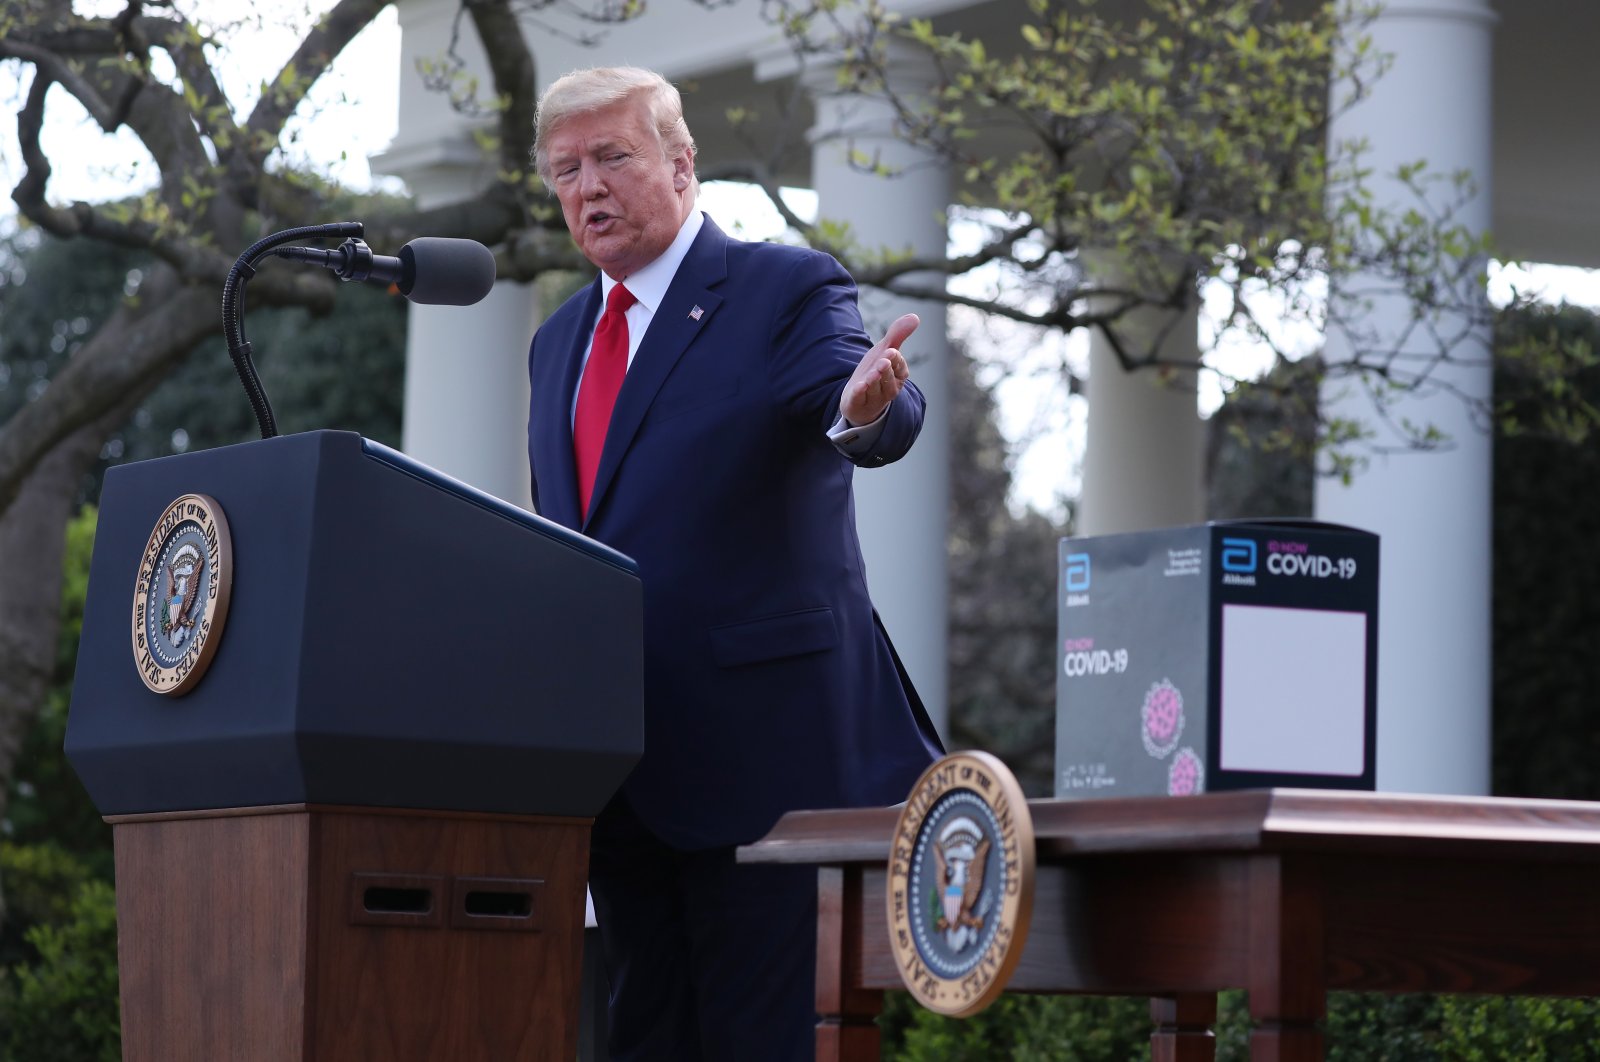 US President Donald Trump gestures towards the Abbot ID NOW COVID-19 test box during the Coronavirus Task Force press briefing on the coronavirus in the Rose Garden at the White House, Washington, D.C., March 30, 2020. (EPA Photo)